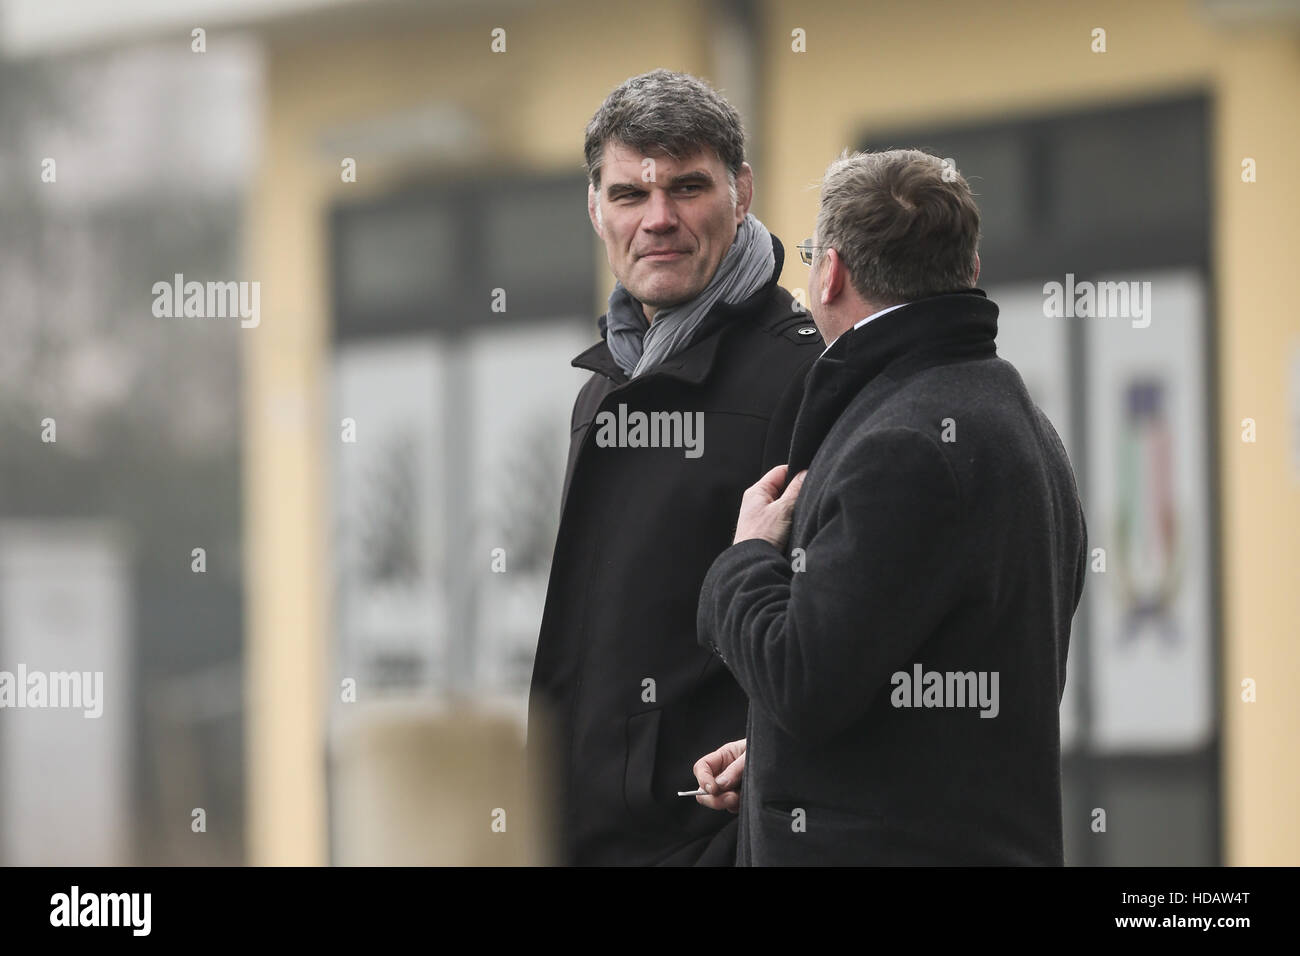 Parma, Italy. 10th December, 2016. Fabien Pelous Stade Toulousain team manager in the match against Zebre in EPCR Champions Cup©Massimiliano Carnabuci/Alamy news Stock Photo